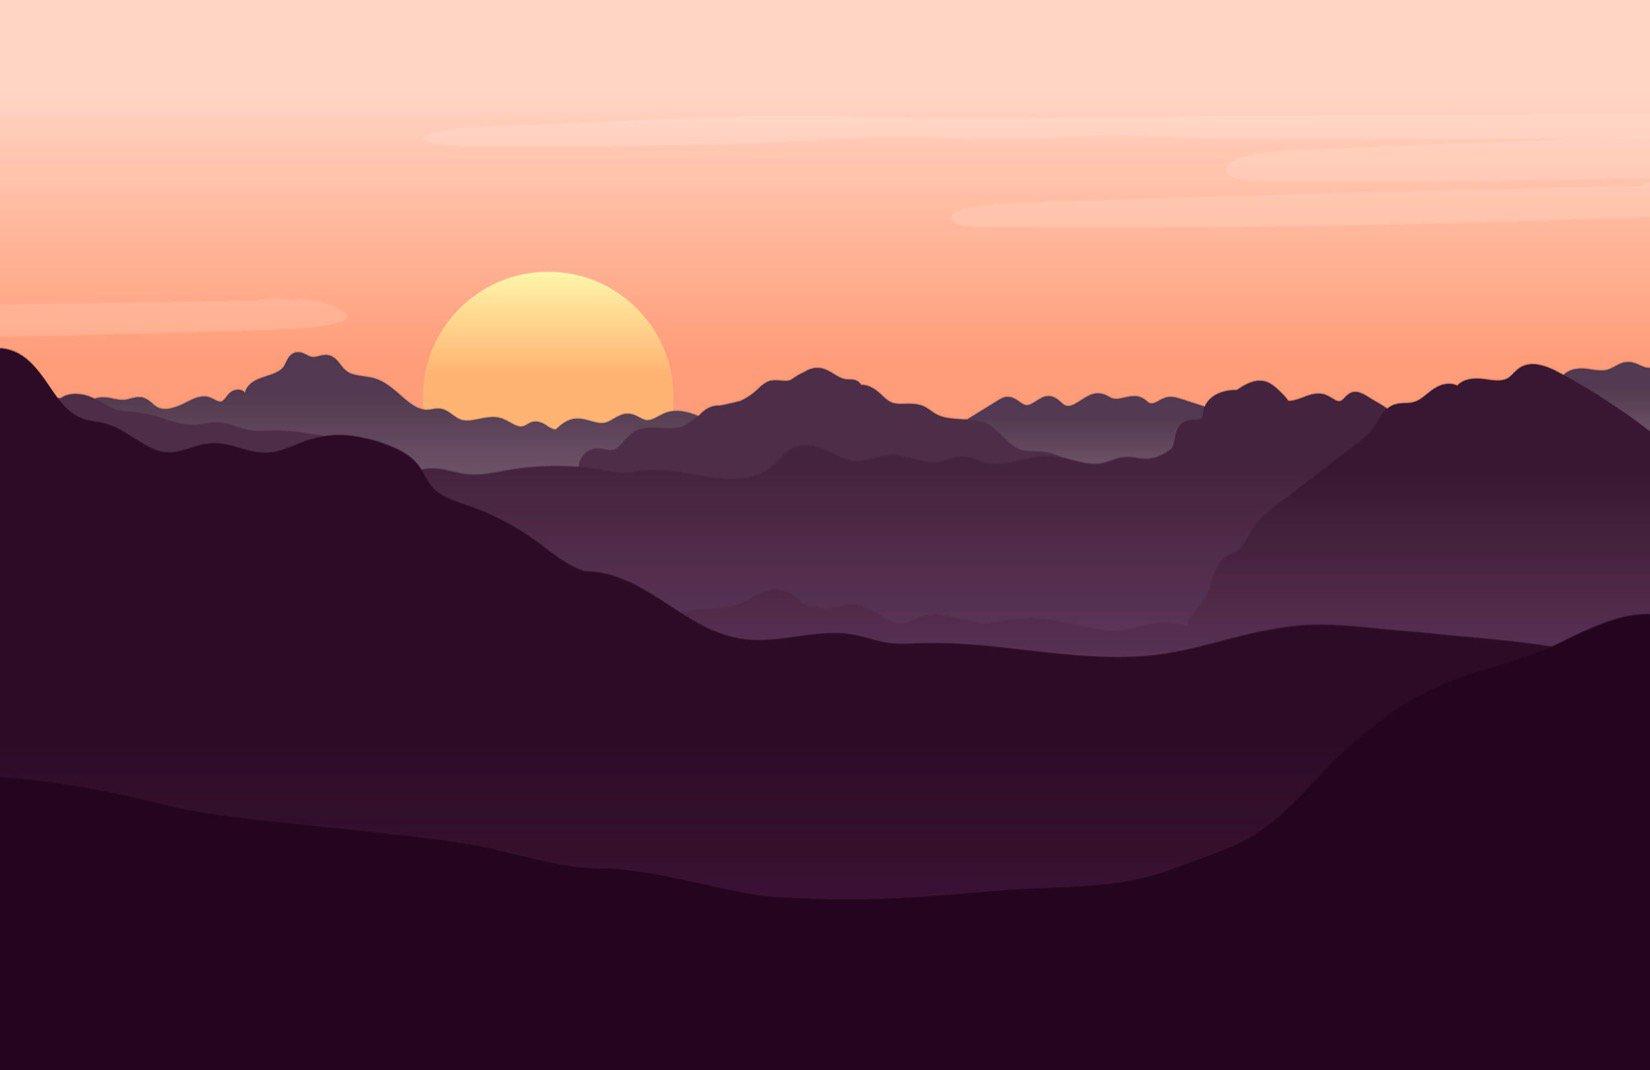 Sunset Mountains Landscape Wallpapers - Wallpaper Cave